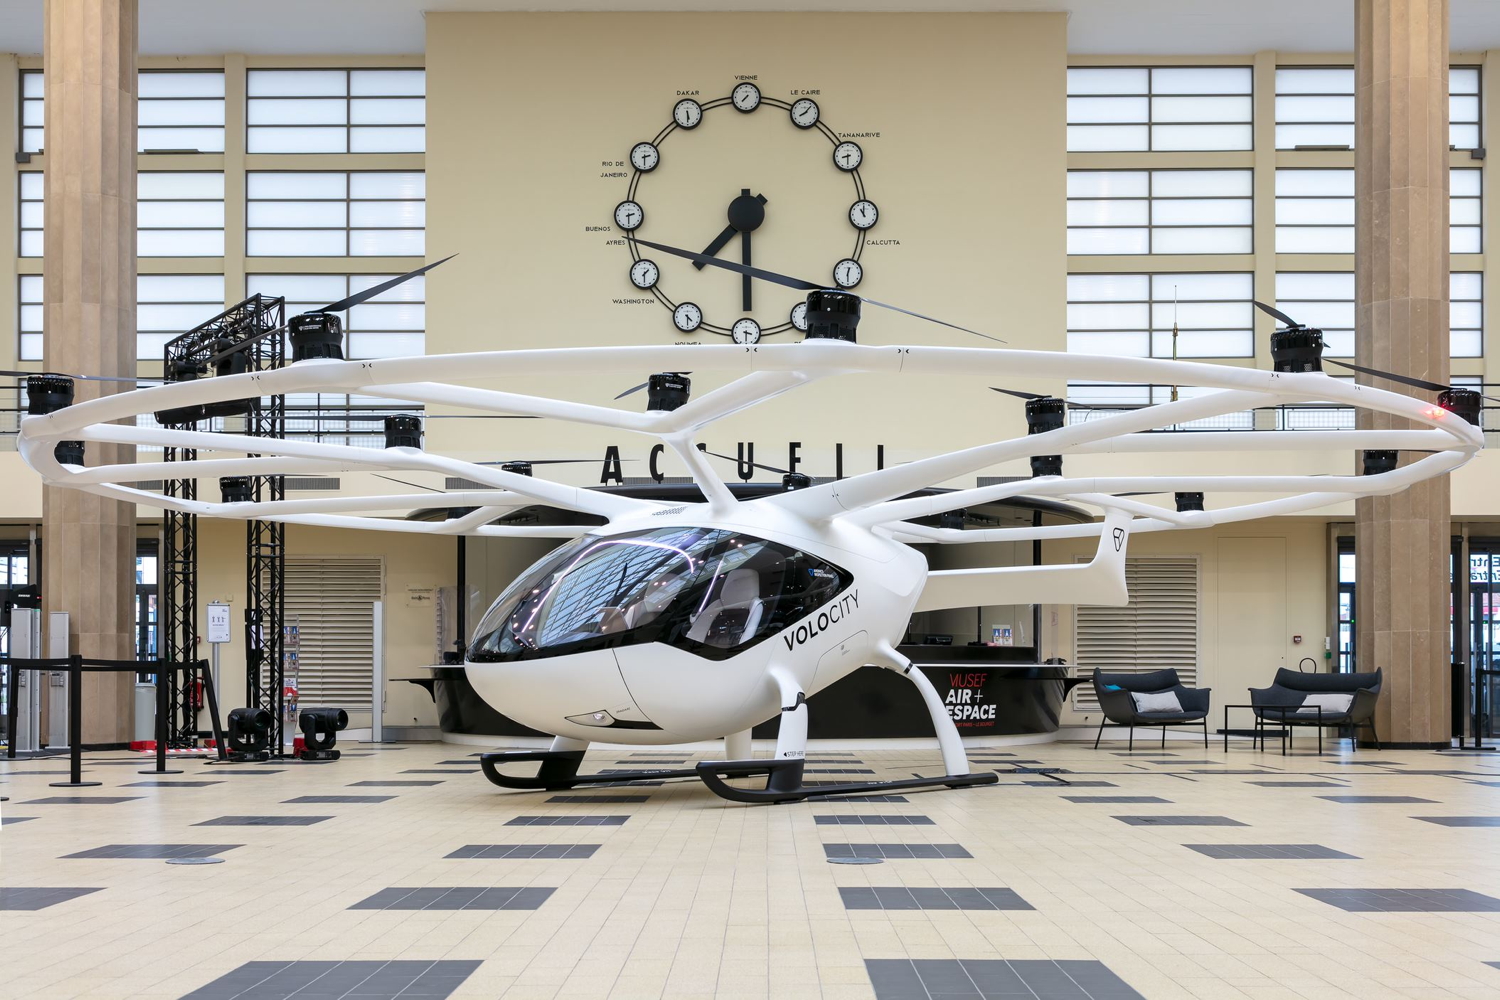 volocopters-volocity-model-in-the-atrium-at-the-national-air-and-space-museum-of-france-during-the-paris-air-forum-c-volocopter-1624960286.jpg